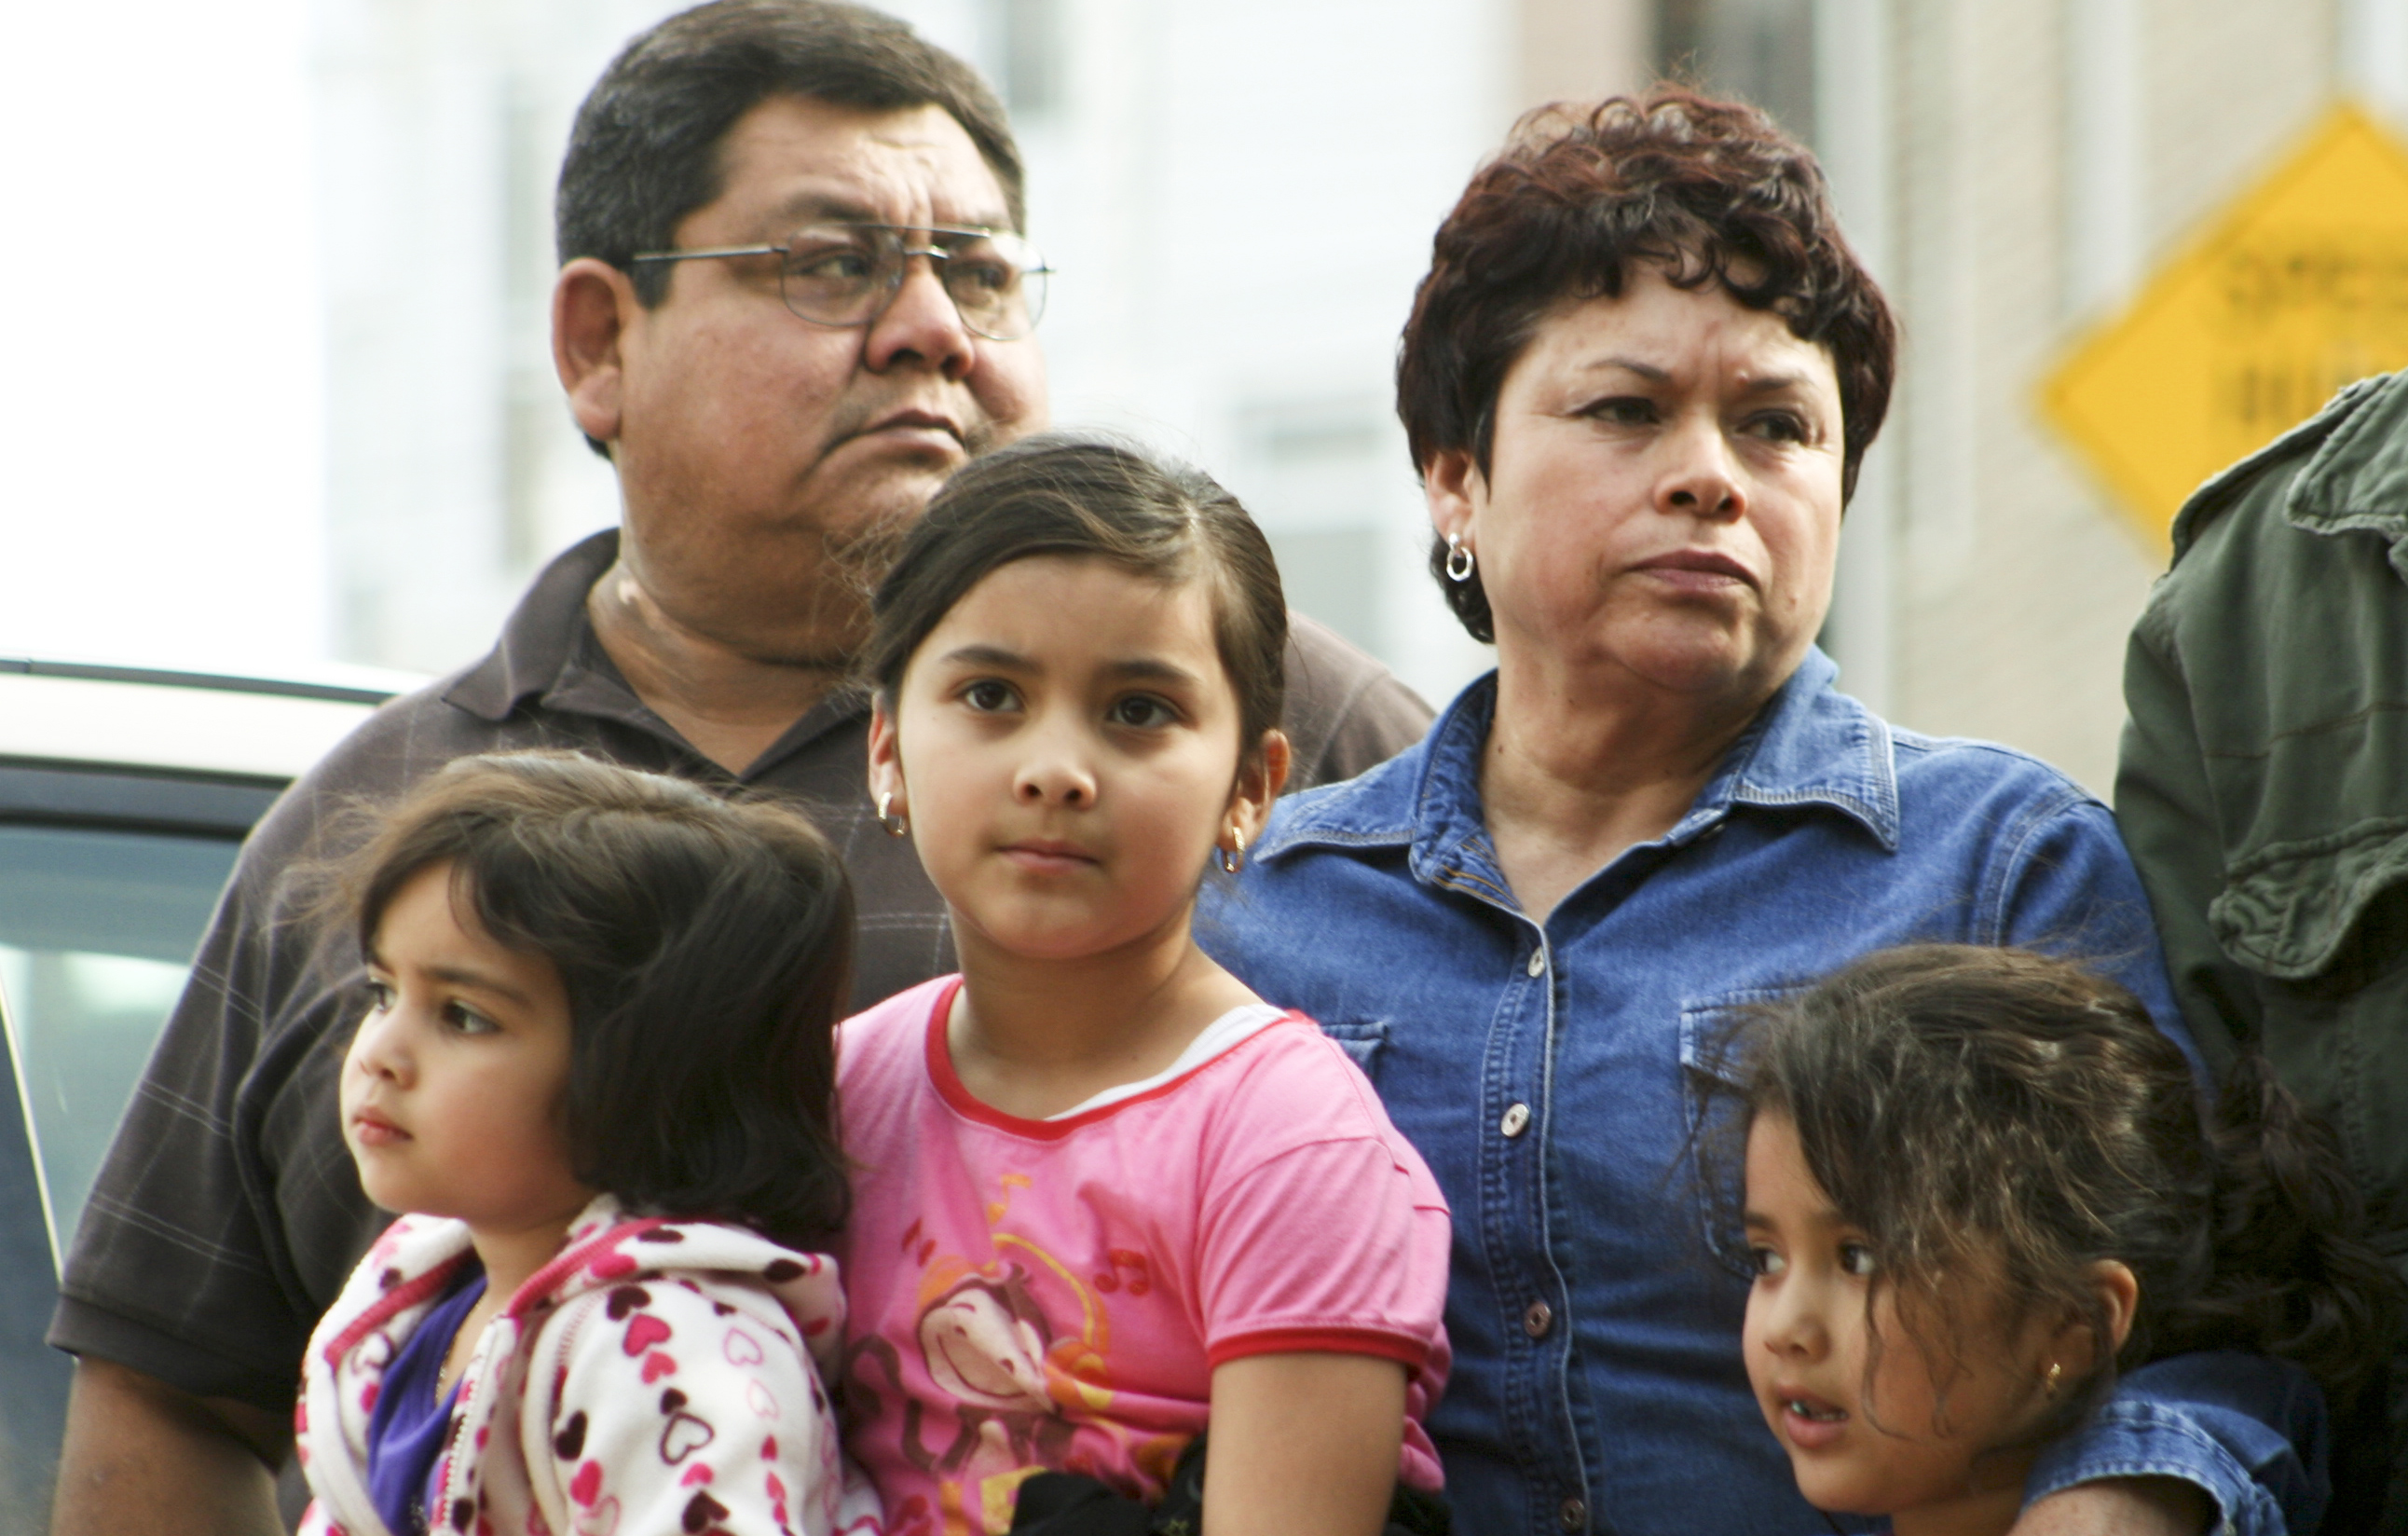 U.S. Children of Undocumented Immigrants Set up for Failure by Current Policies